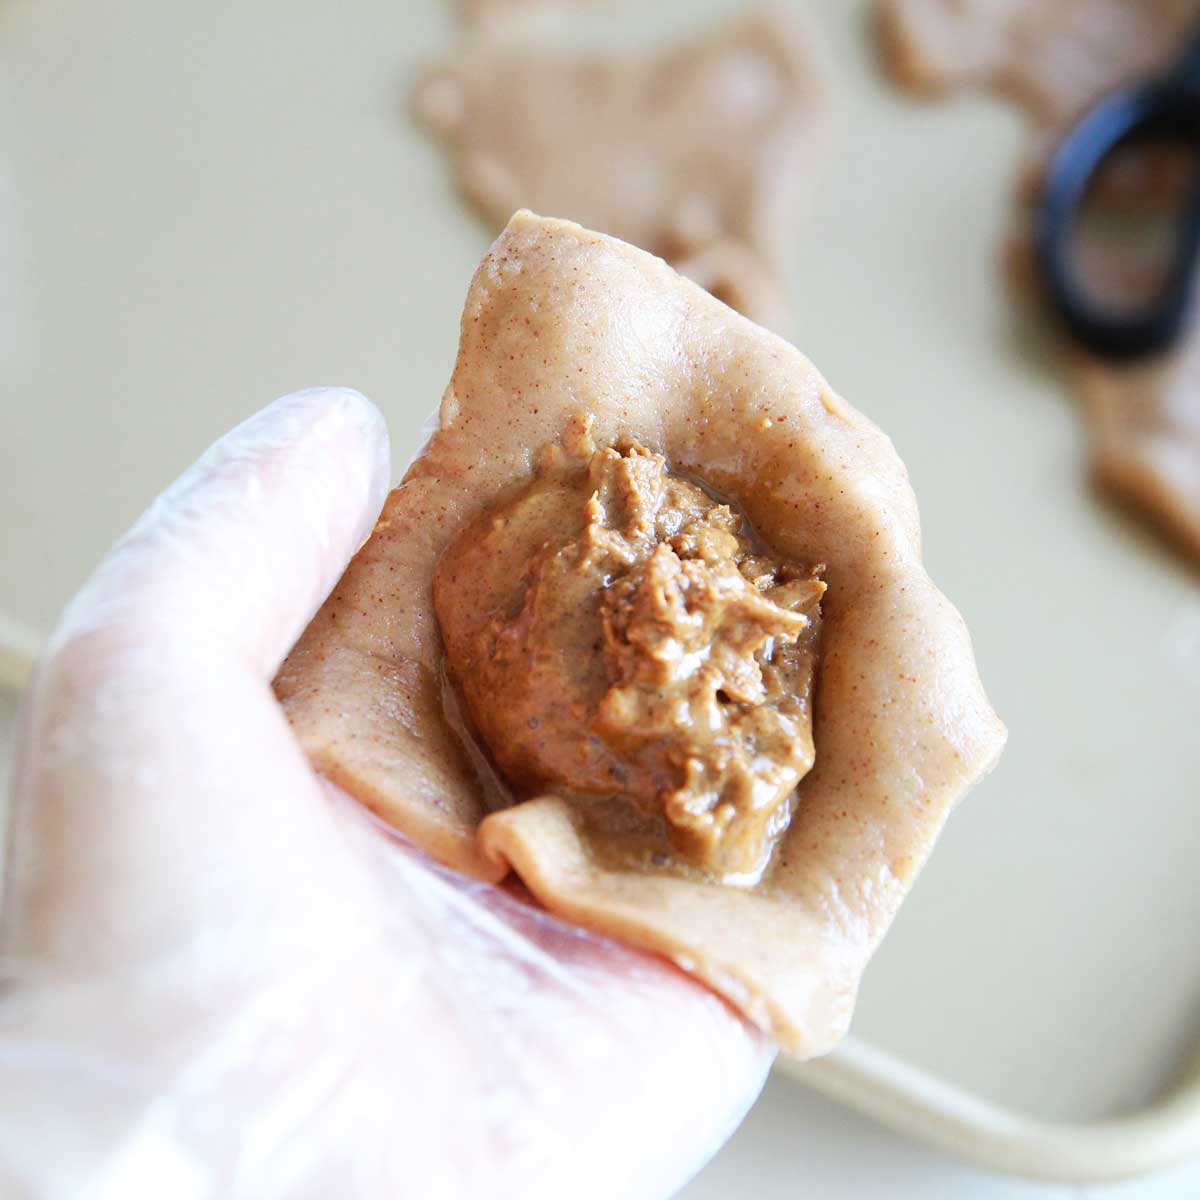 Healthy Almond Butter Mochi Made in the Microwave - Almond Butter Mochi